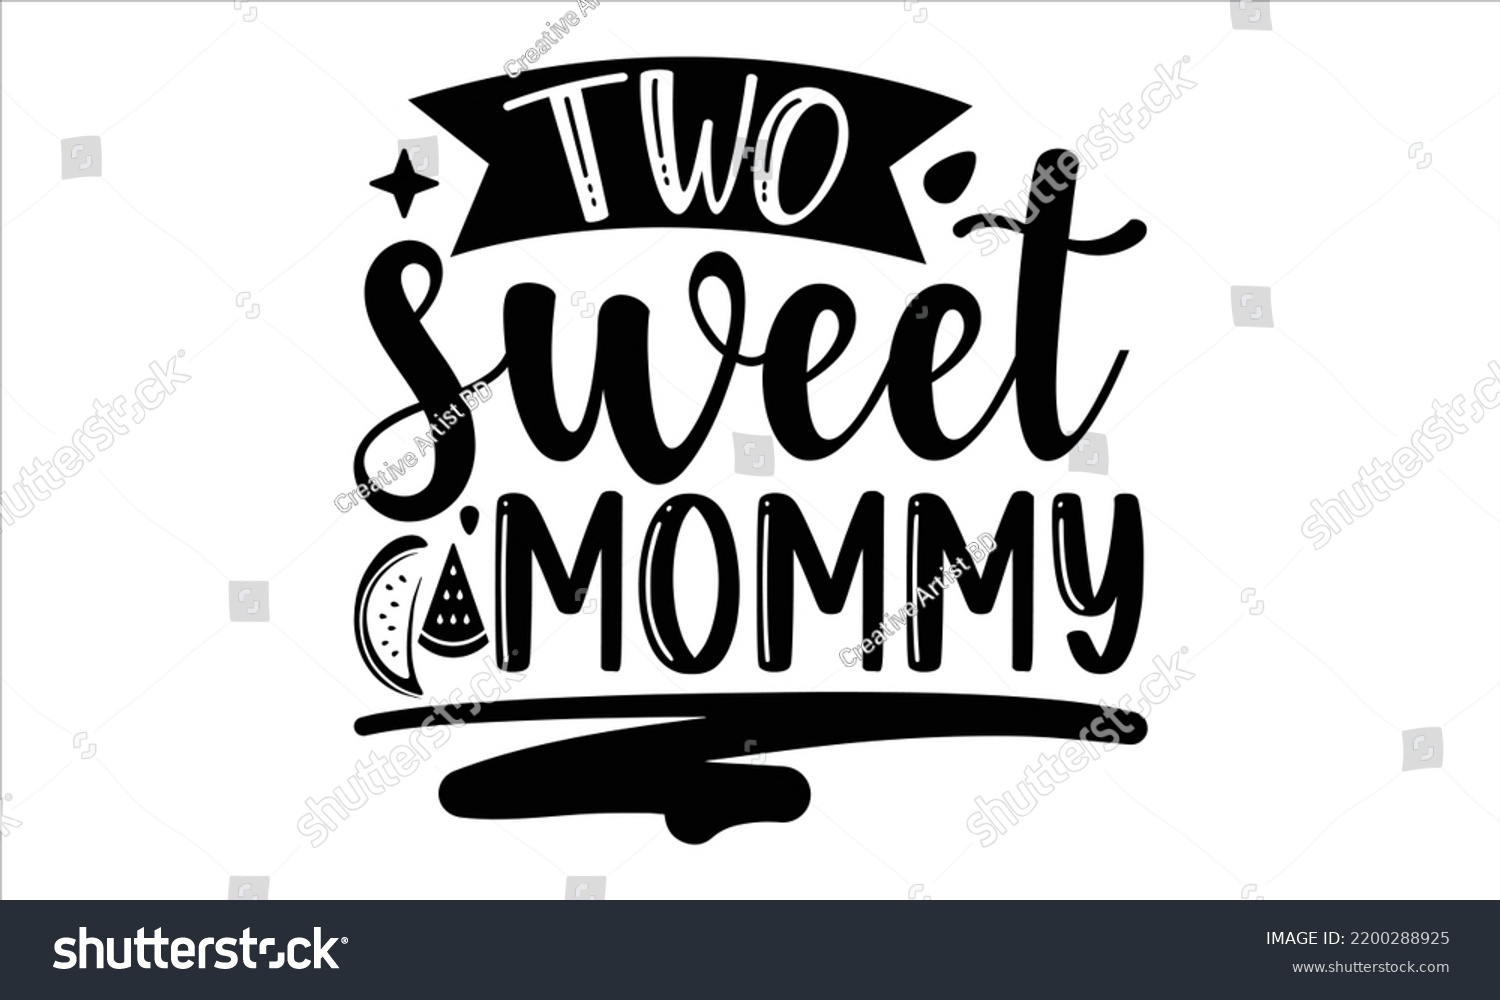 SVG of Two Sweet Mommy  - Watermelon T shirt Design, Modern calligraphy, Cut Files for Cricut Svg, Illustration for prints on bags, posters svg